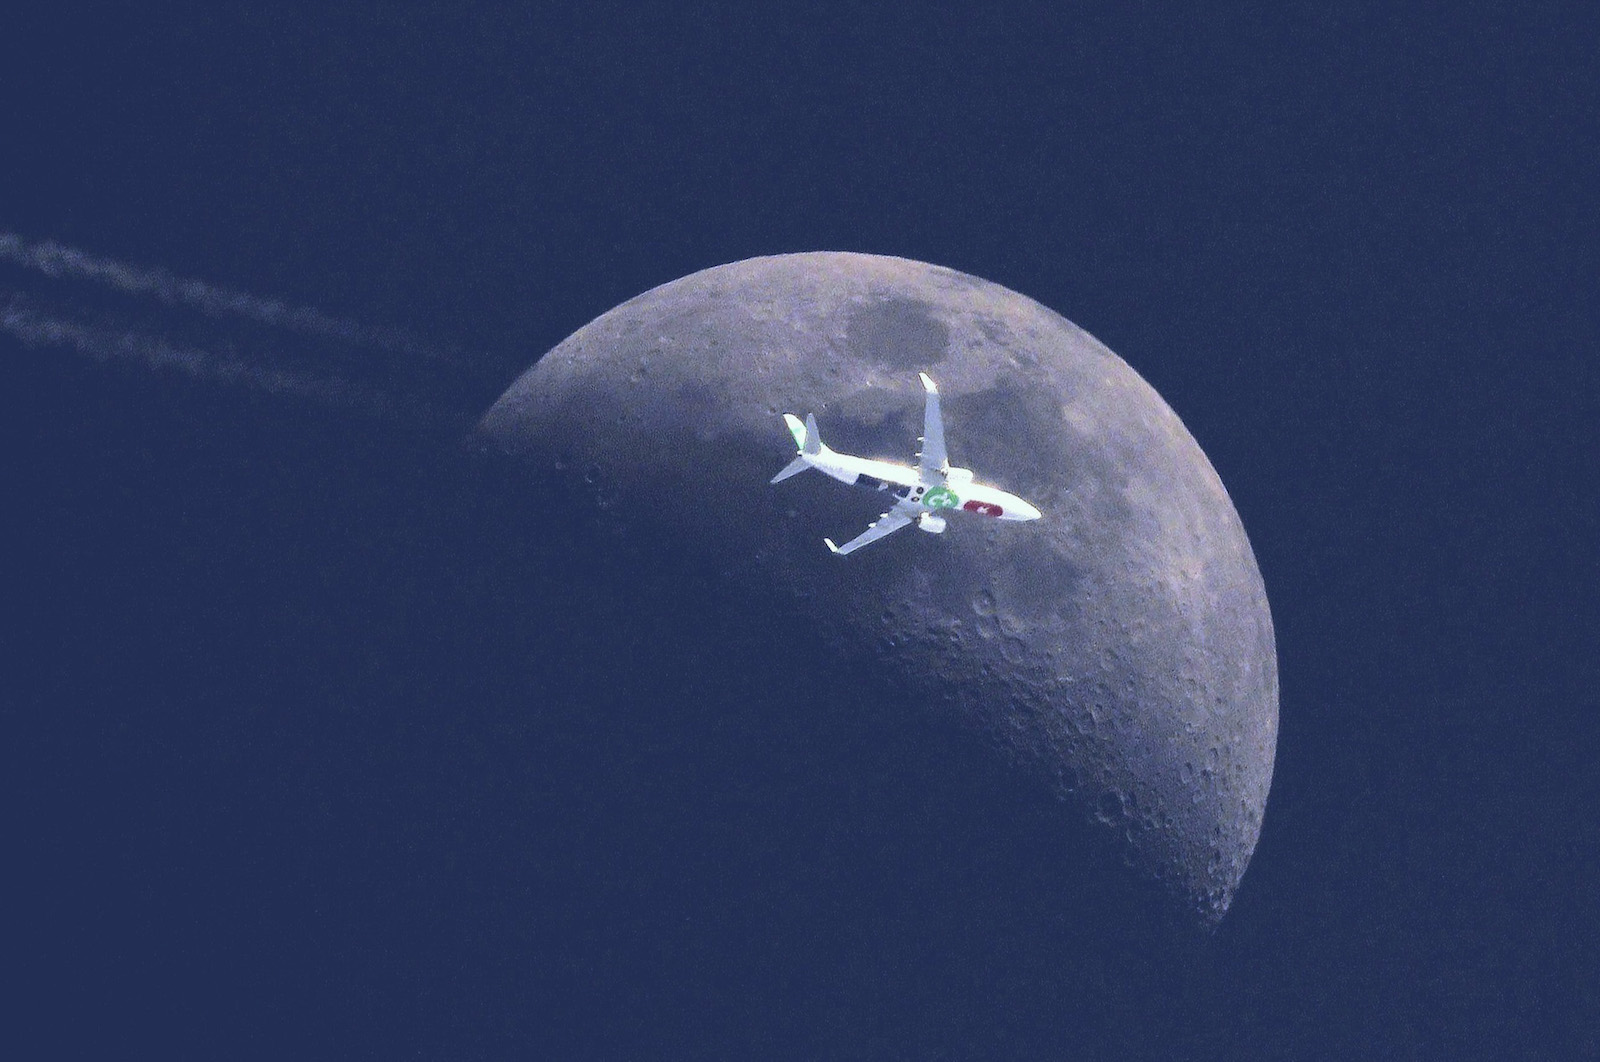 CATERS_PLANES_IN_FRONT_OF_THE_MOON_015_3432882.jpg